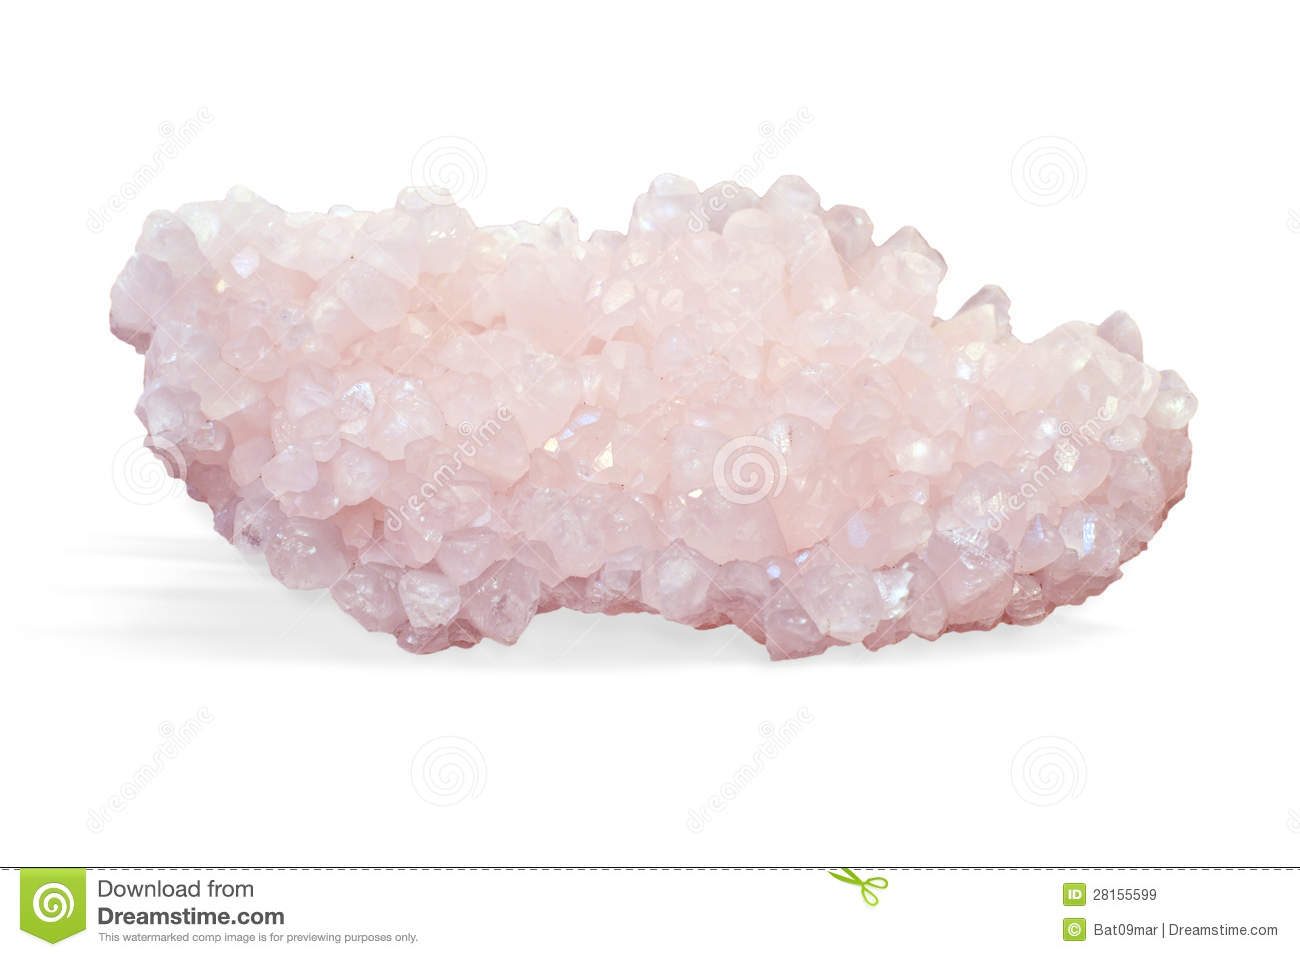 Raw Ore Of Rose Quartz Crystal On White Closeup Of Natural Mineral